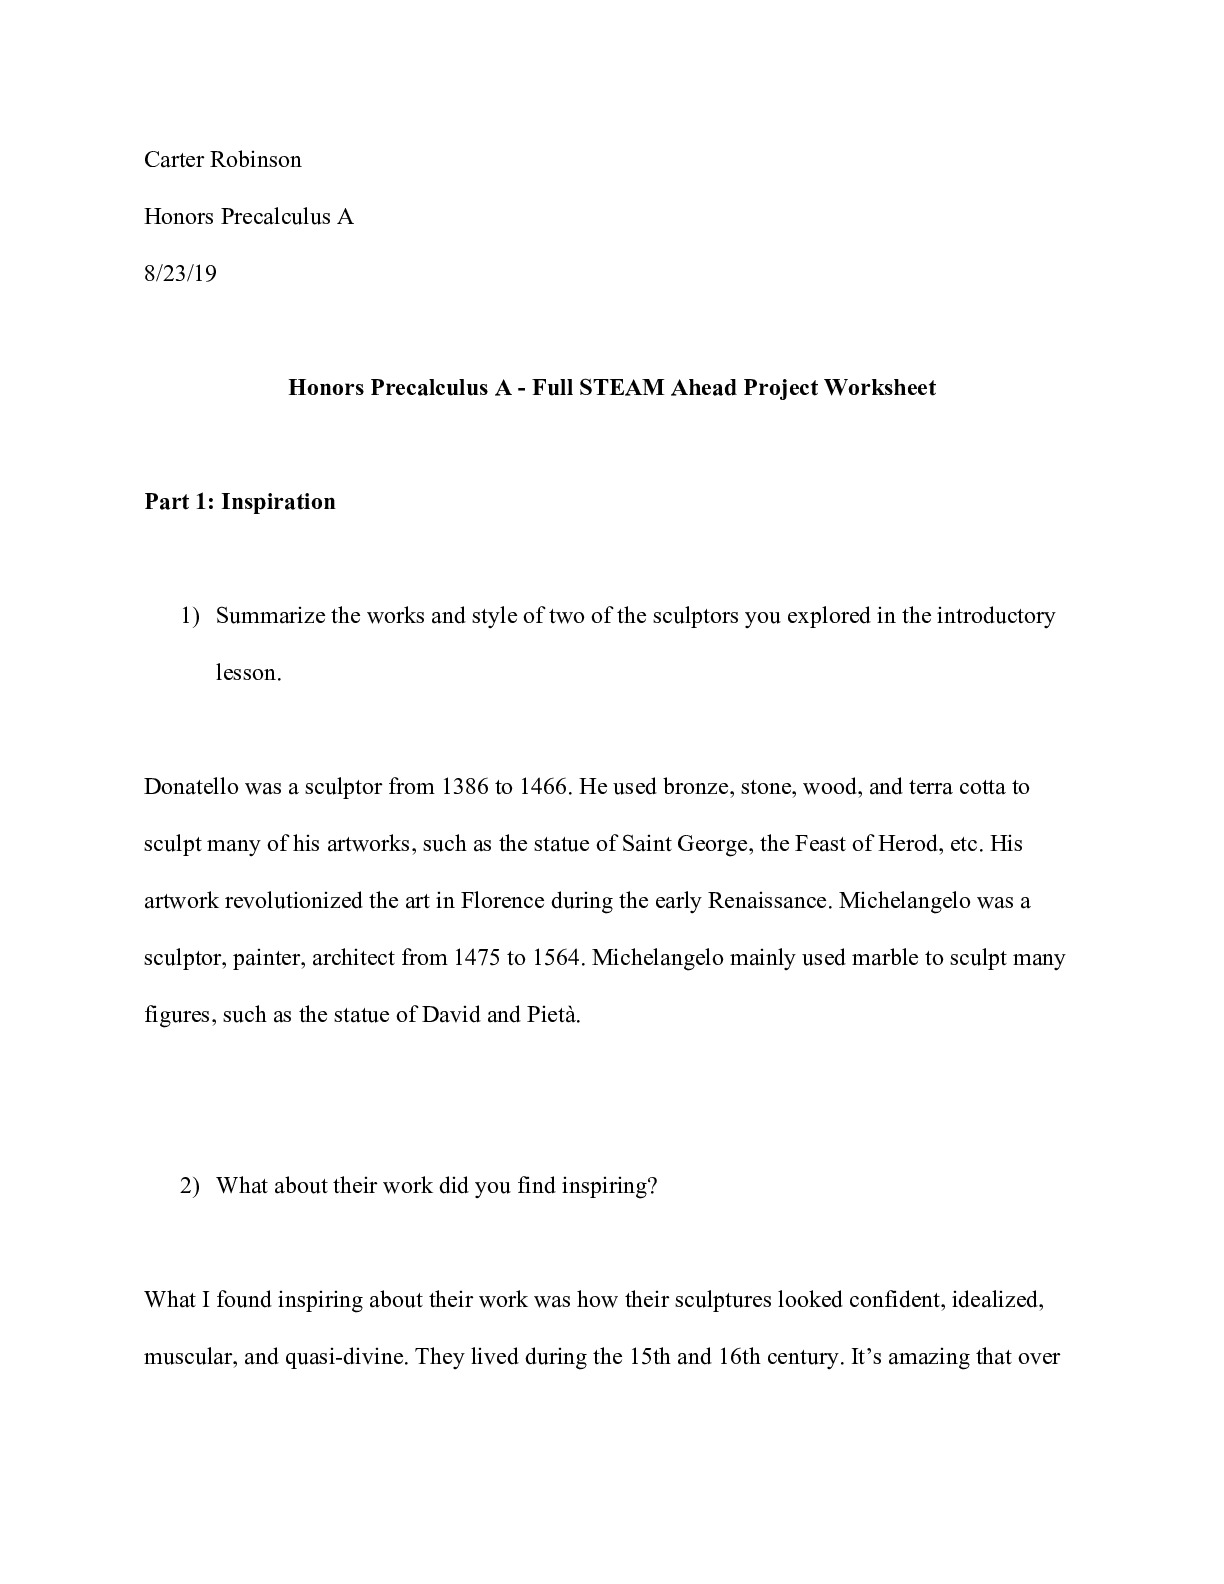 Honors_Precalculus_A___Full_STEAM_Ahead_Project_Worksheet___Part_1.pdf